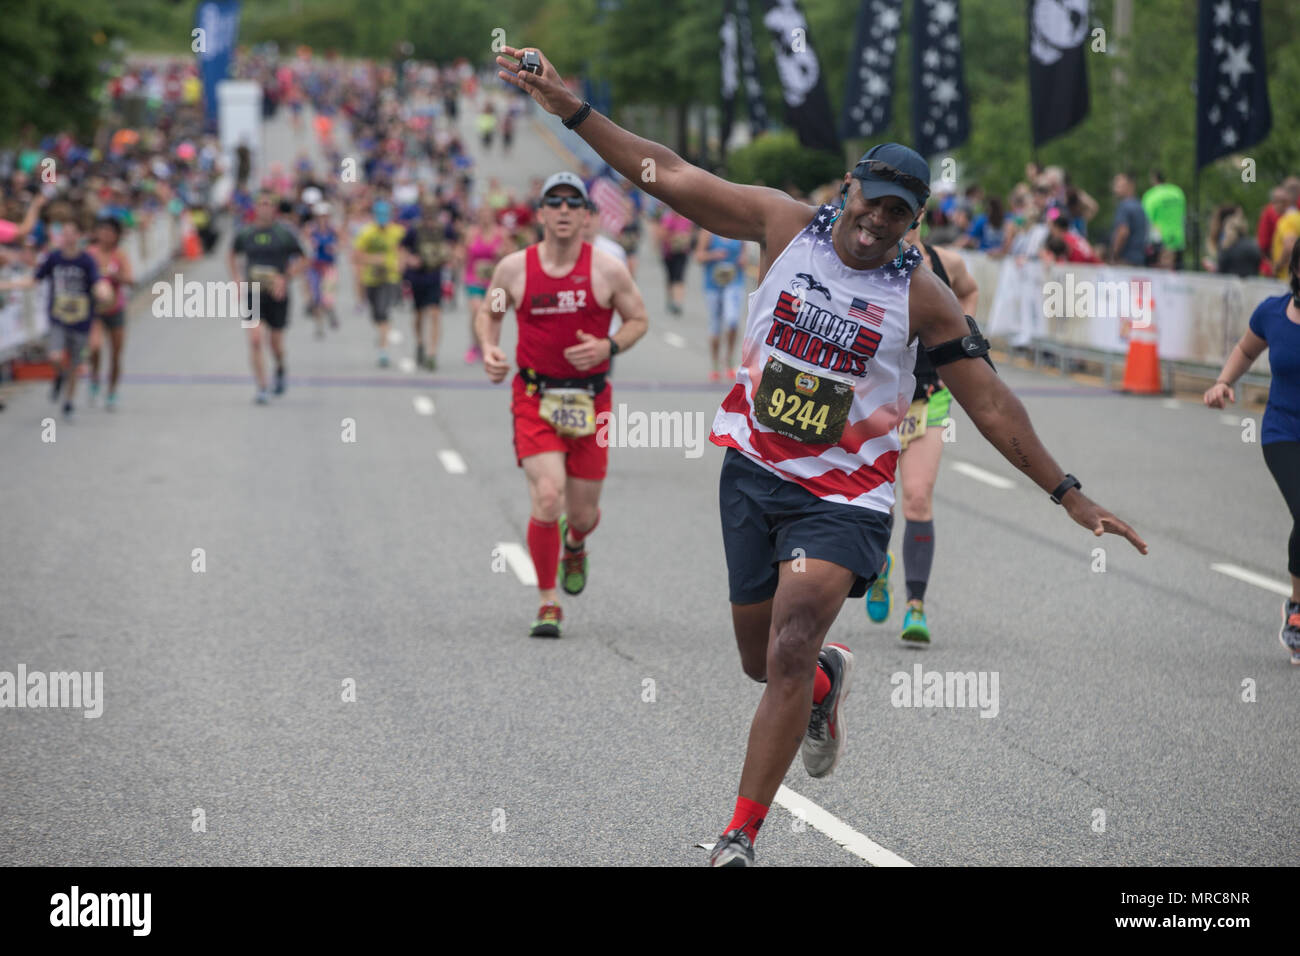 Leodis Smith finishes the final stretch of the Devil Dog Double portion of the 10th Annual Marine Corps Historic Half (MCHH), the 18.1-mile route from the Fredericksburg Expo Center into the historic downtown areas of Fredericksburg, Va., May 21, 2017. The MCHH attracts over 8,000 participants and features the Marine Corps Semper 5ive and the Devil Dog Double. (U.S. Marine Corps photo by Sgt. John M. Raufmann) Stock Photo